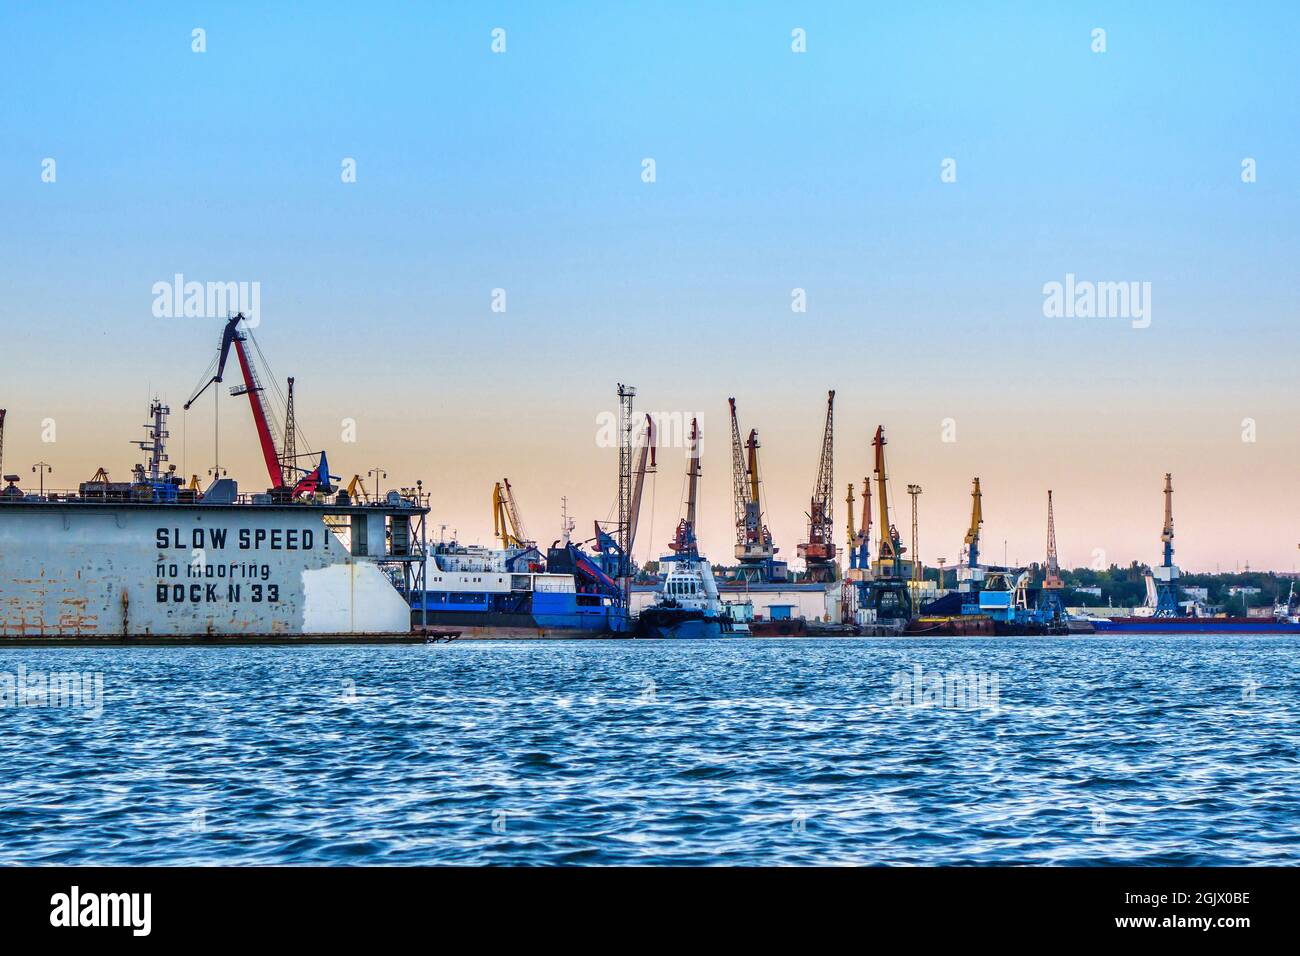 Sea port with working cranes & cargo ships Stock Photo